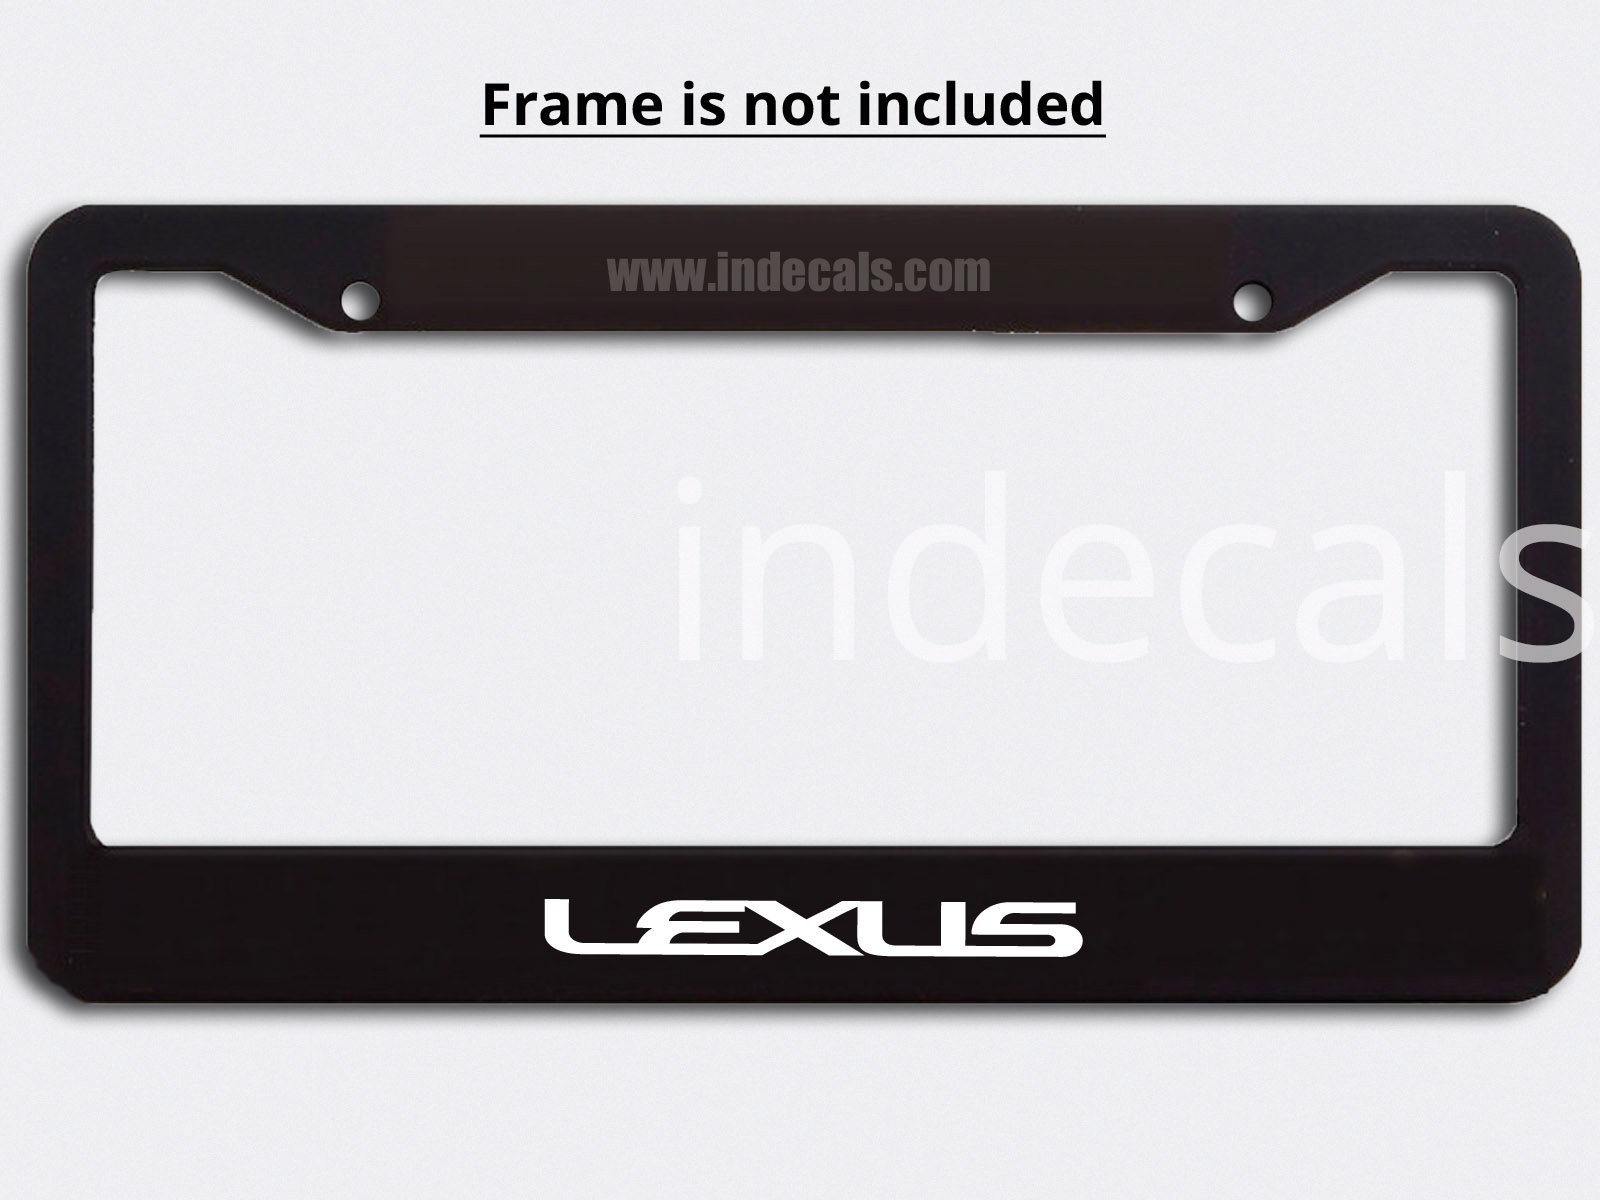 3 x Lexus Stickers for Plate Frame - White